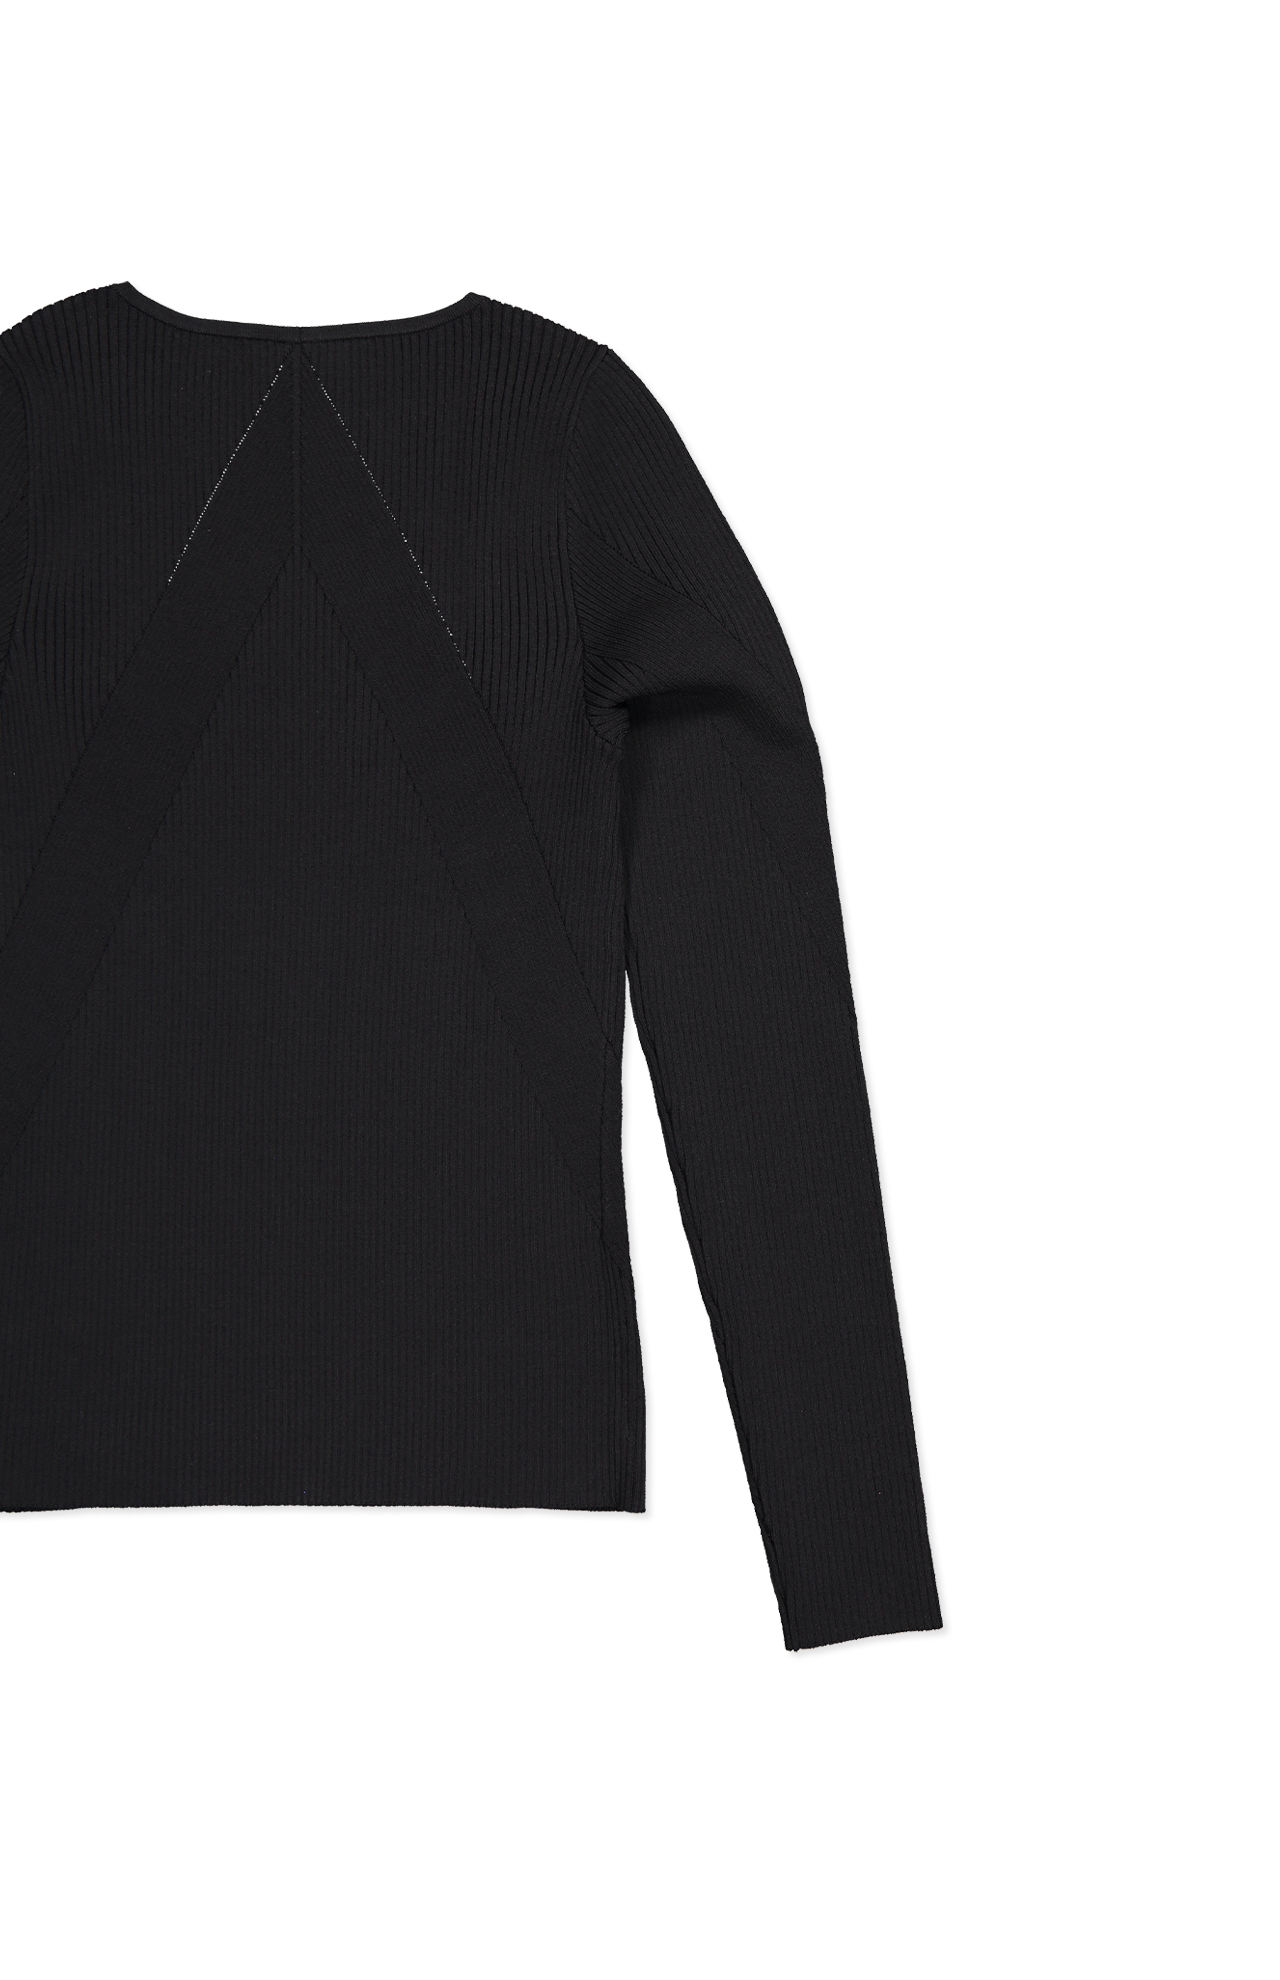 Asher Square Neck Long Sleeve (6985112486003)